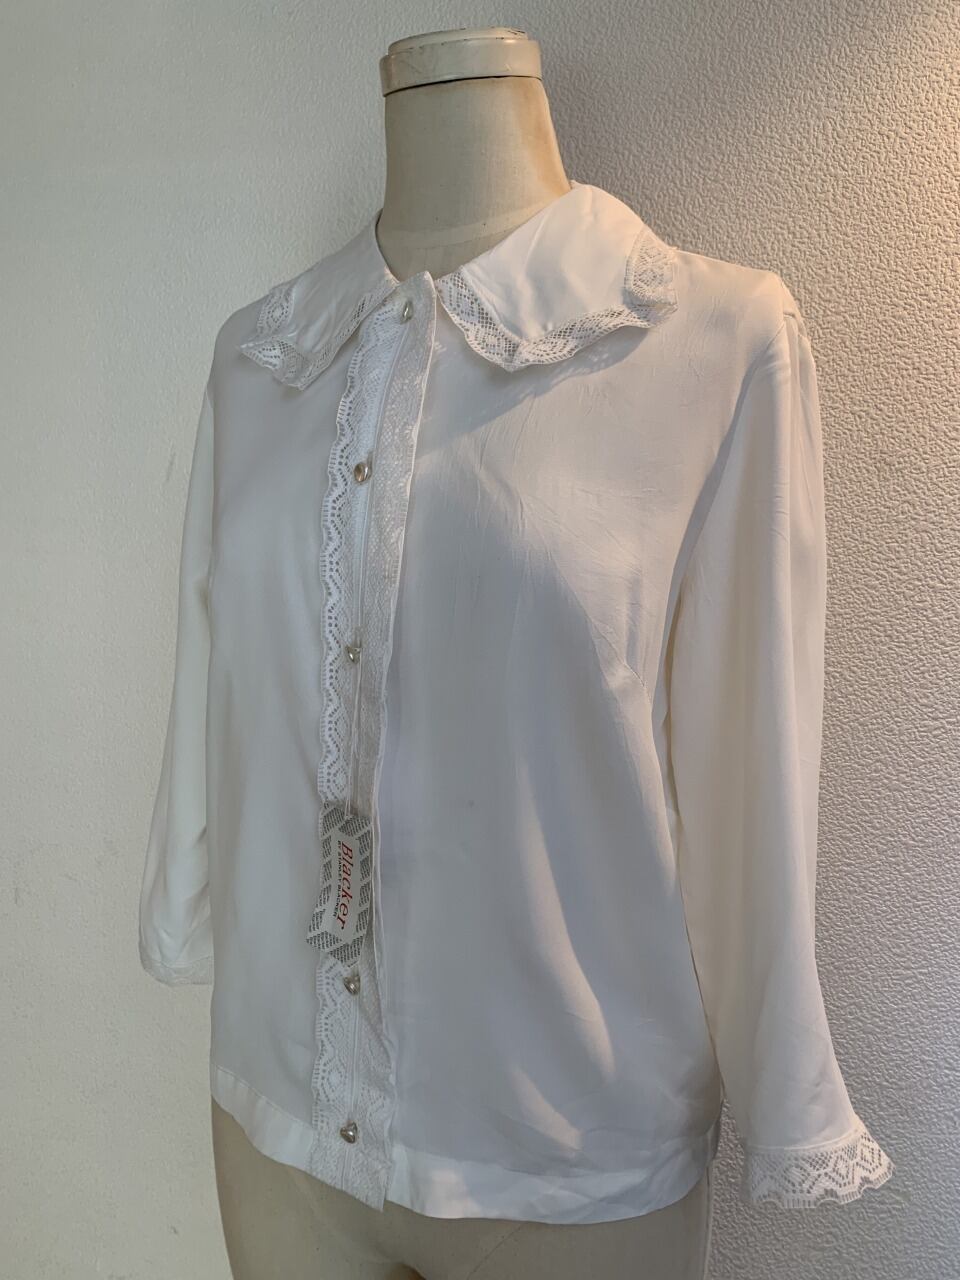 1980's Lace Three Quarter Sleeve Blouse "Dead Stock"